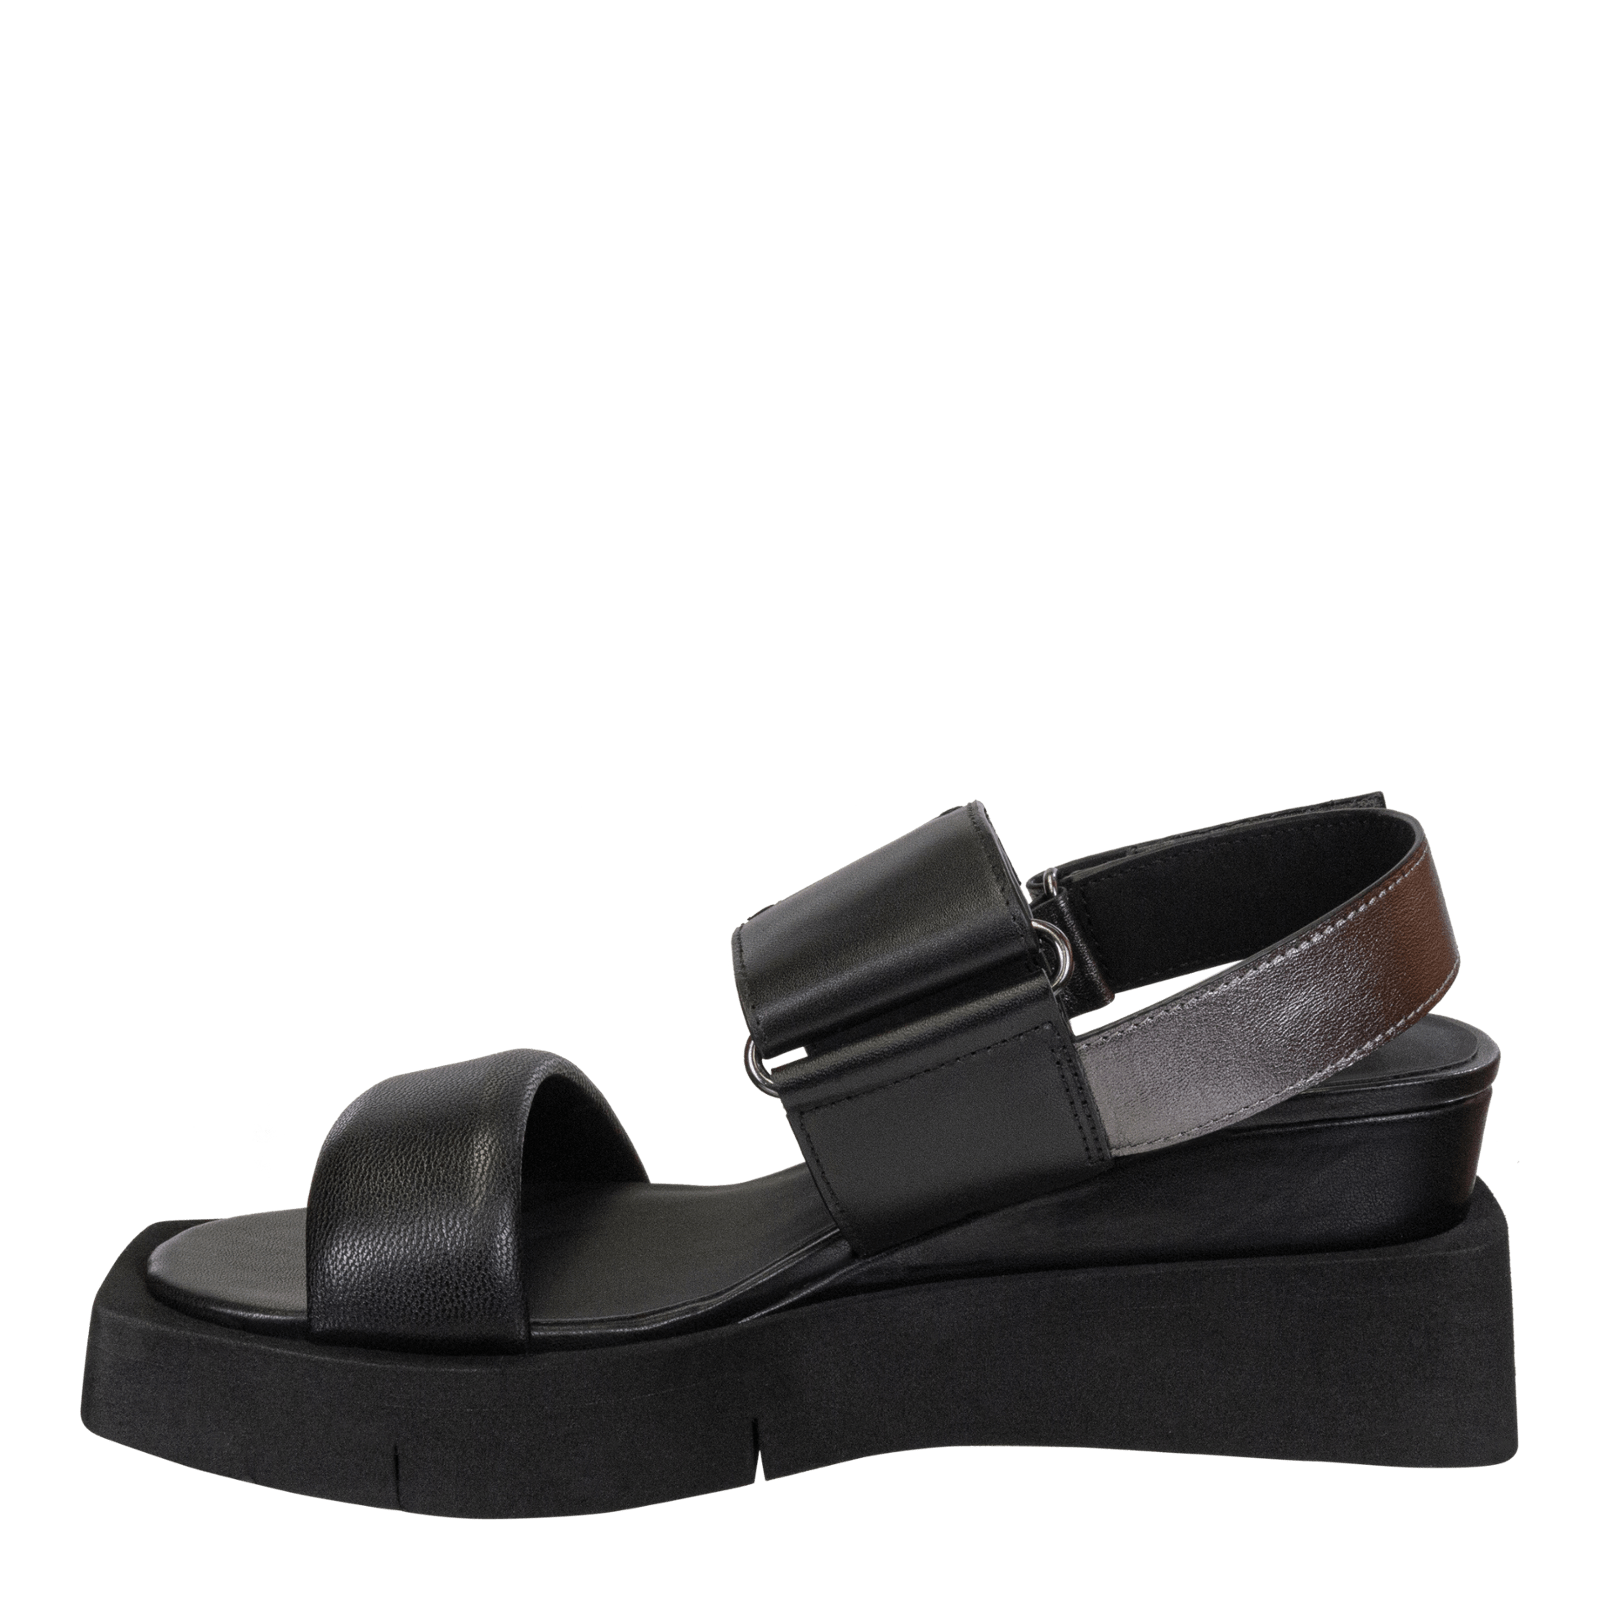 PARADOX BLACK Wedge Sandals - musthaveSHOES